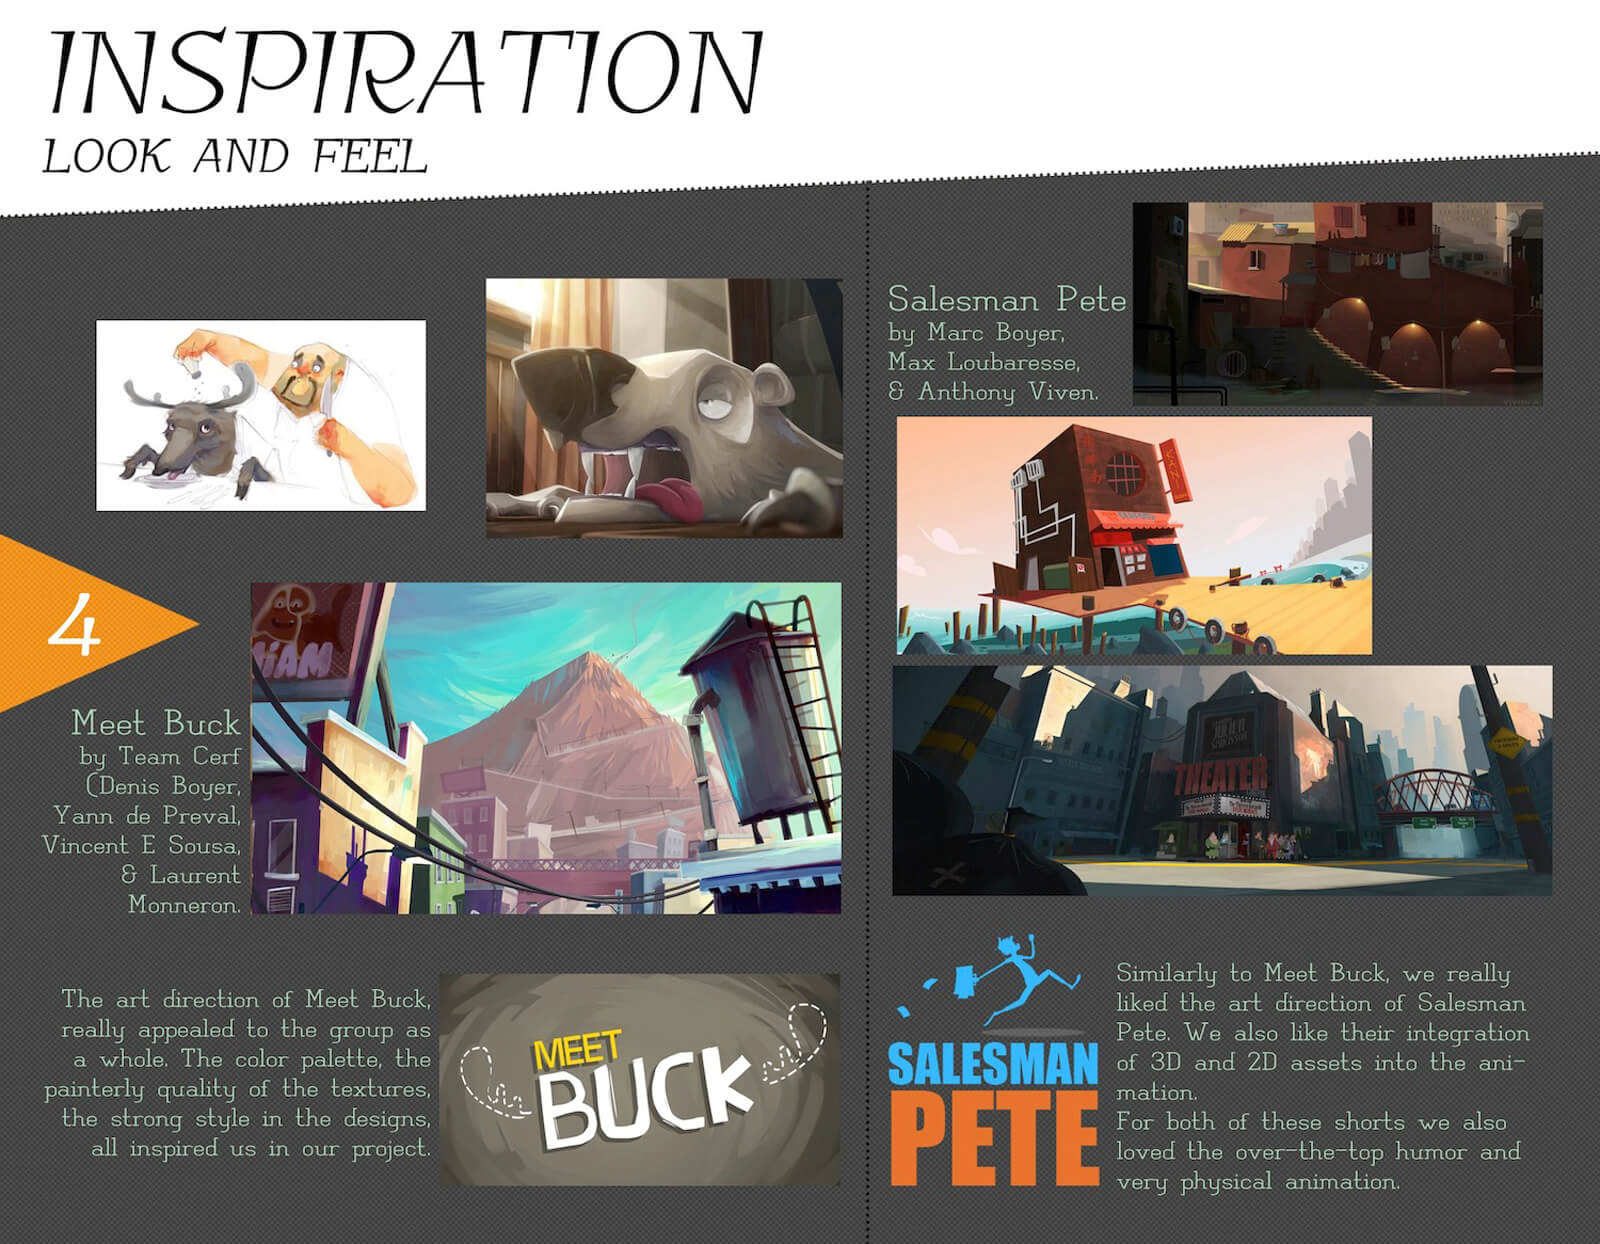 Look and feel inspiration slide for the film Super Secret, depicting reference art from Meet Buck and Salesman Pete